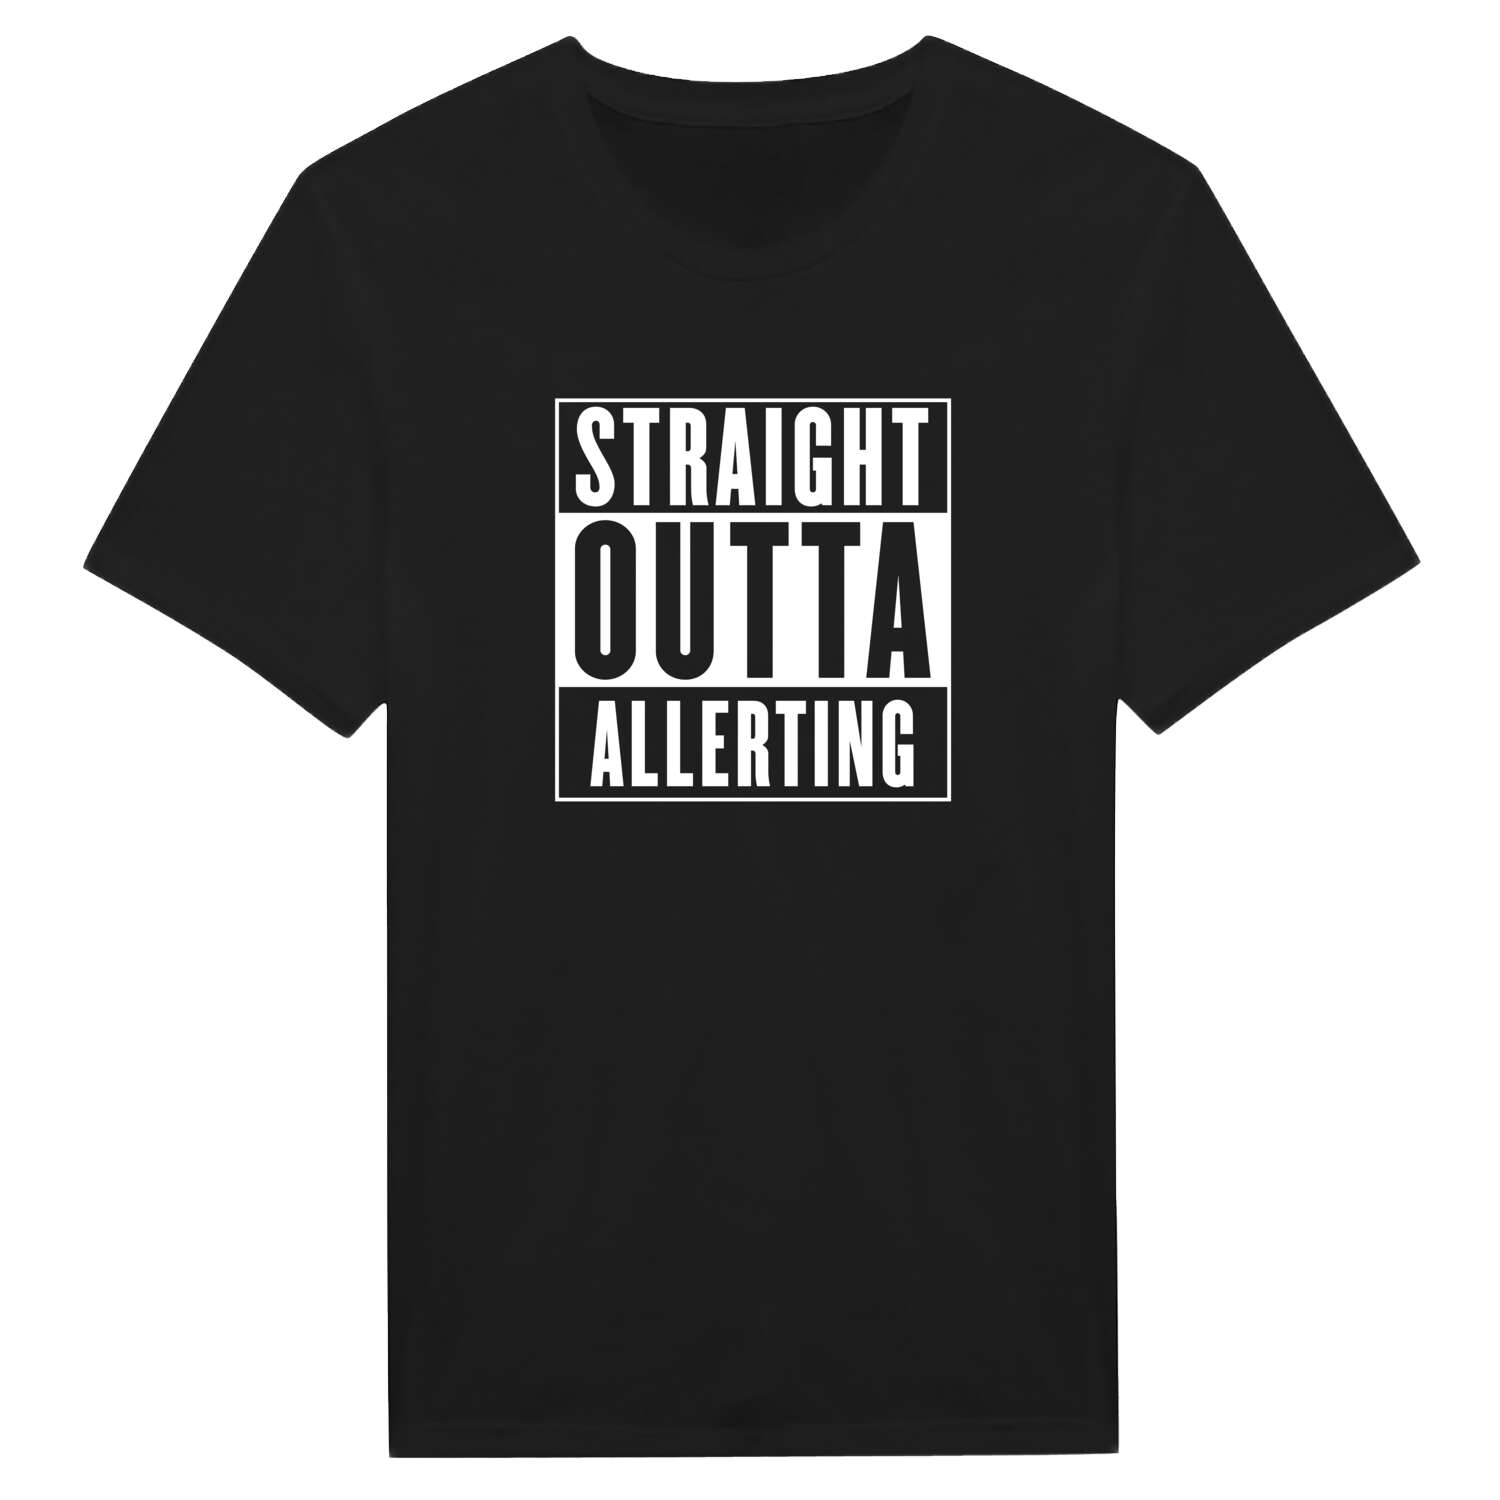 Allerting T-Shirt »Straight Outta«